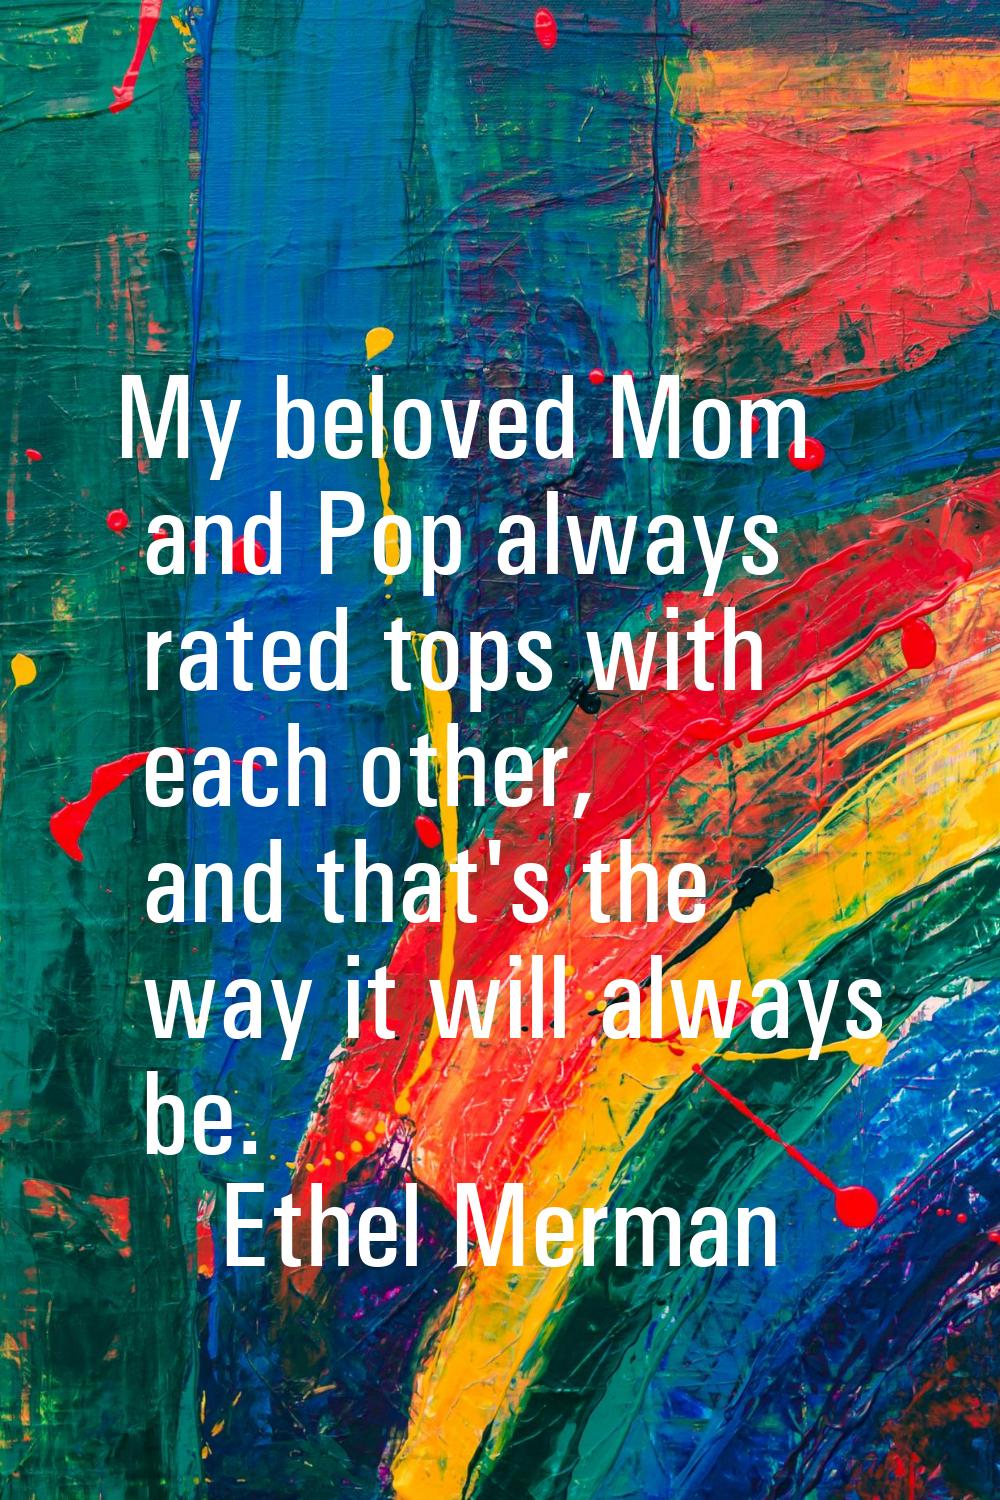 My beloved Mom and Pop always rated tops with each other, and that's the way it will always be.